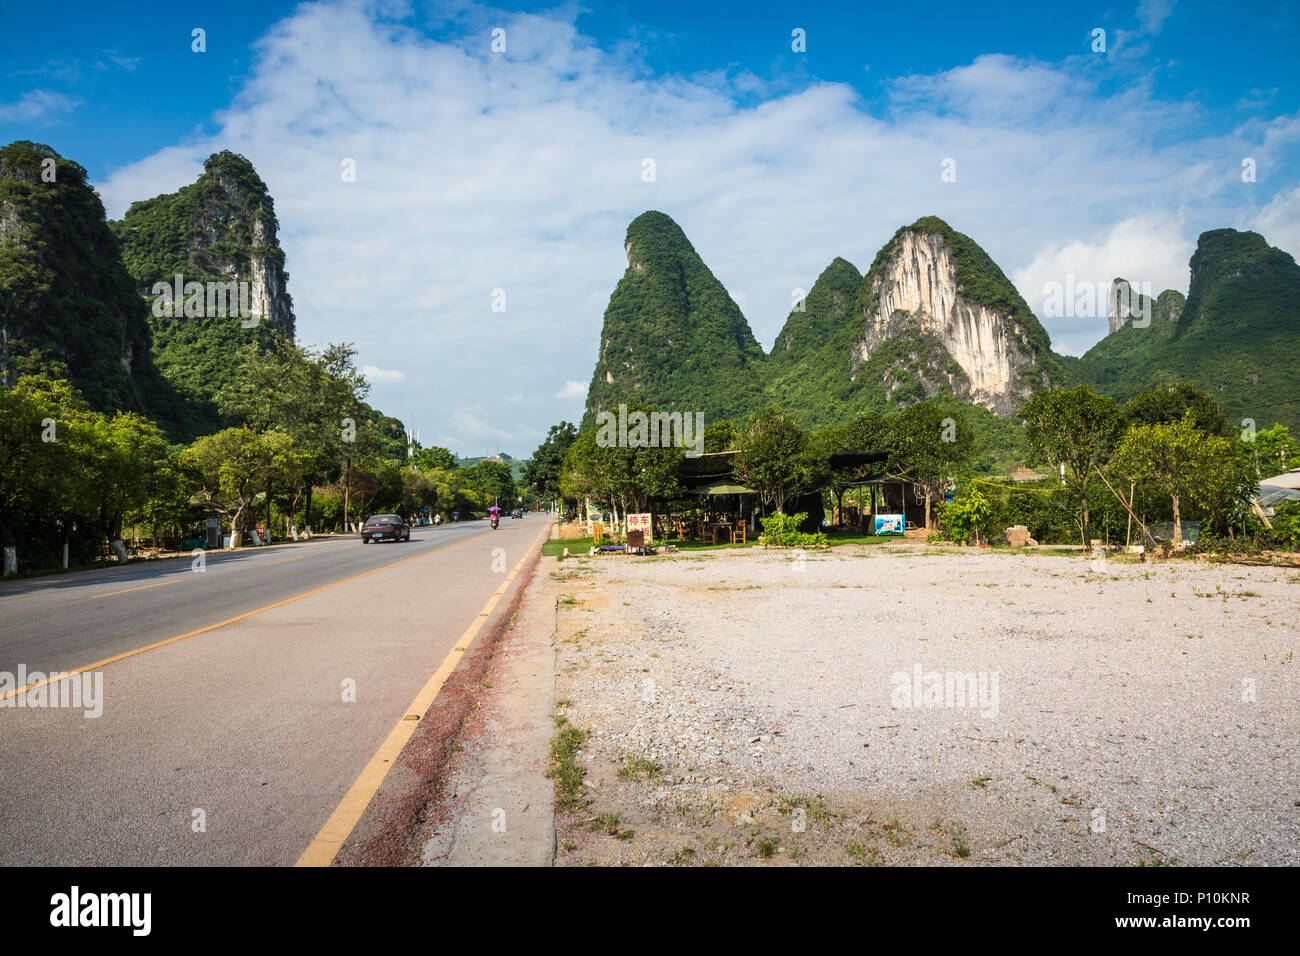 Scenic summer sunny landscape at Yangshuo County of Guilin, China. View of beautiful karst mountains Amazing green hills on blue sky background. Stock Photo